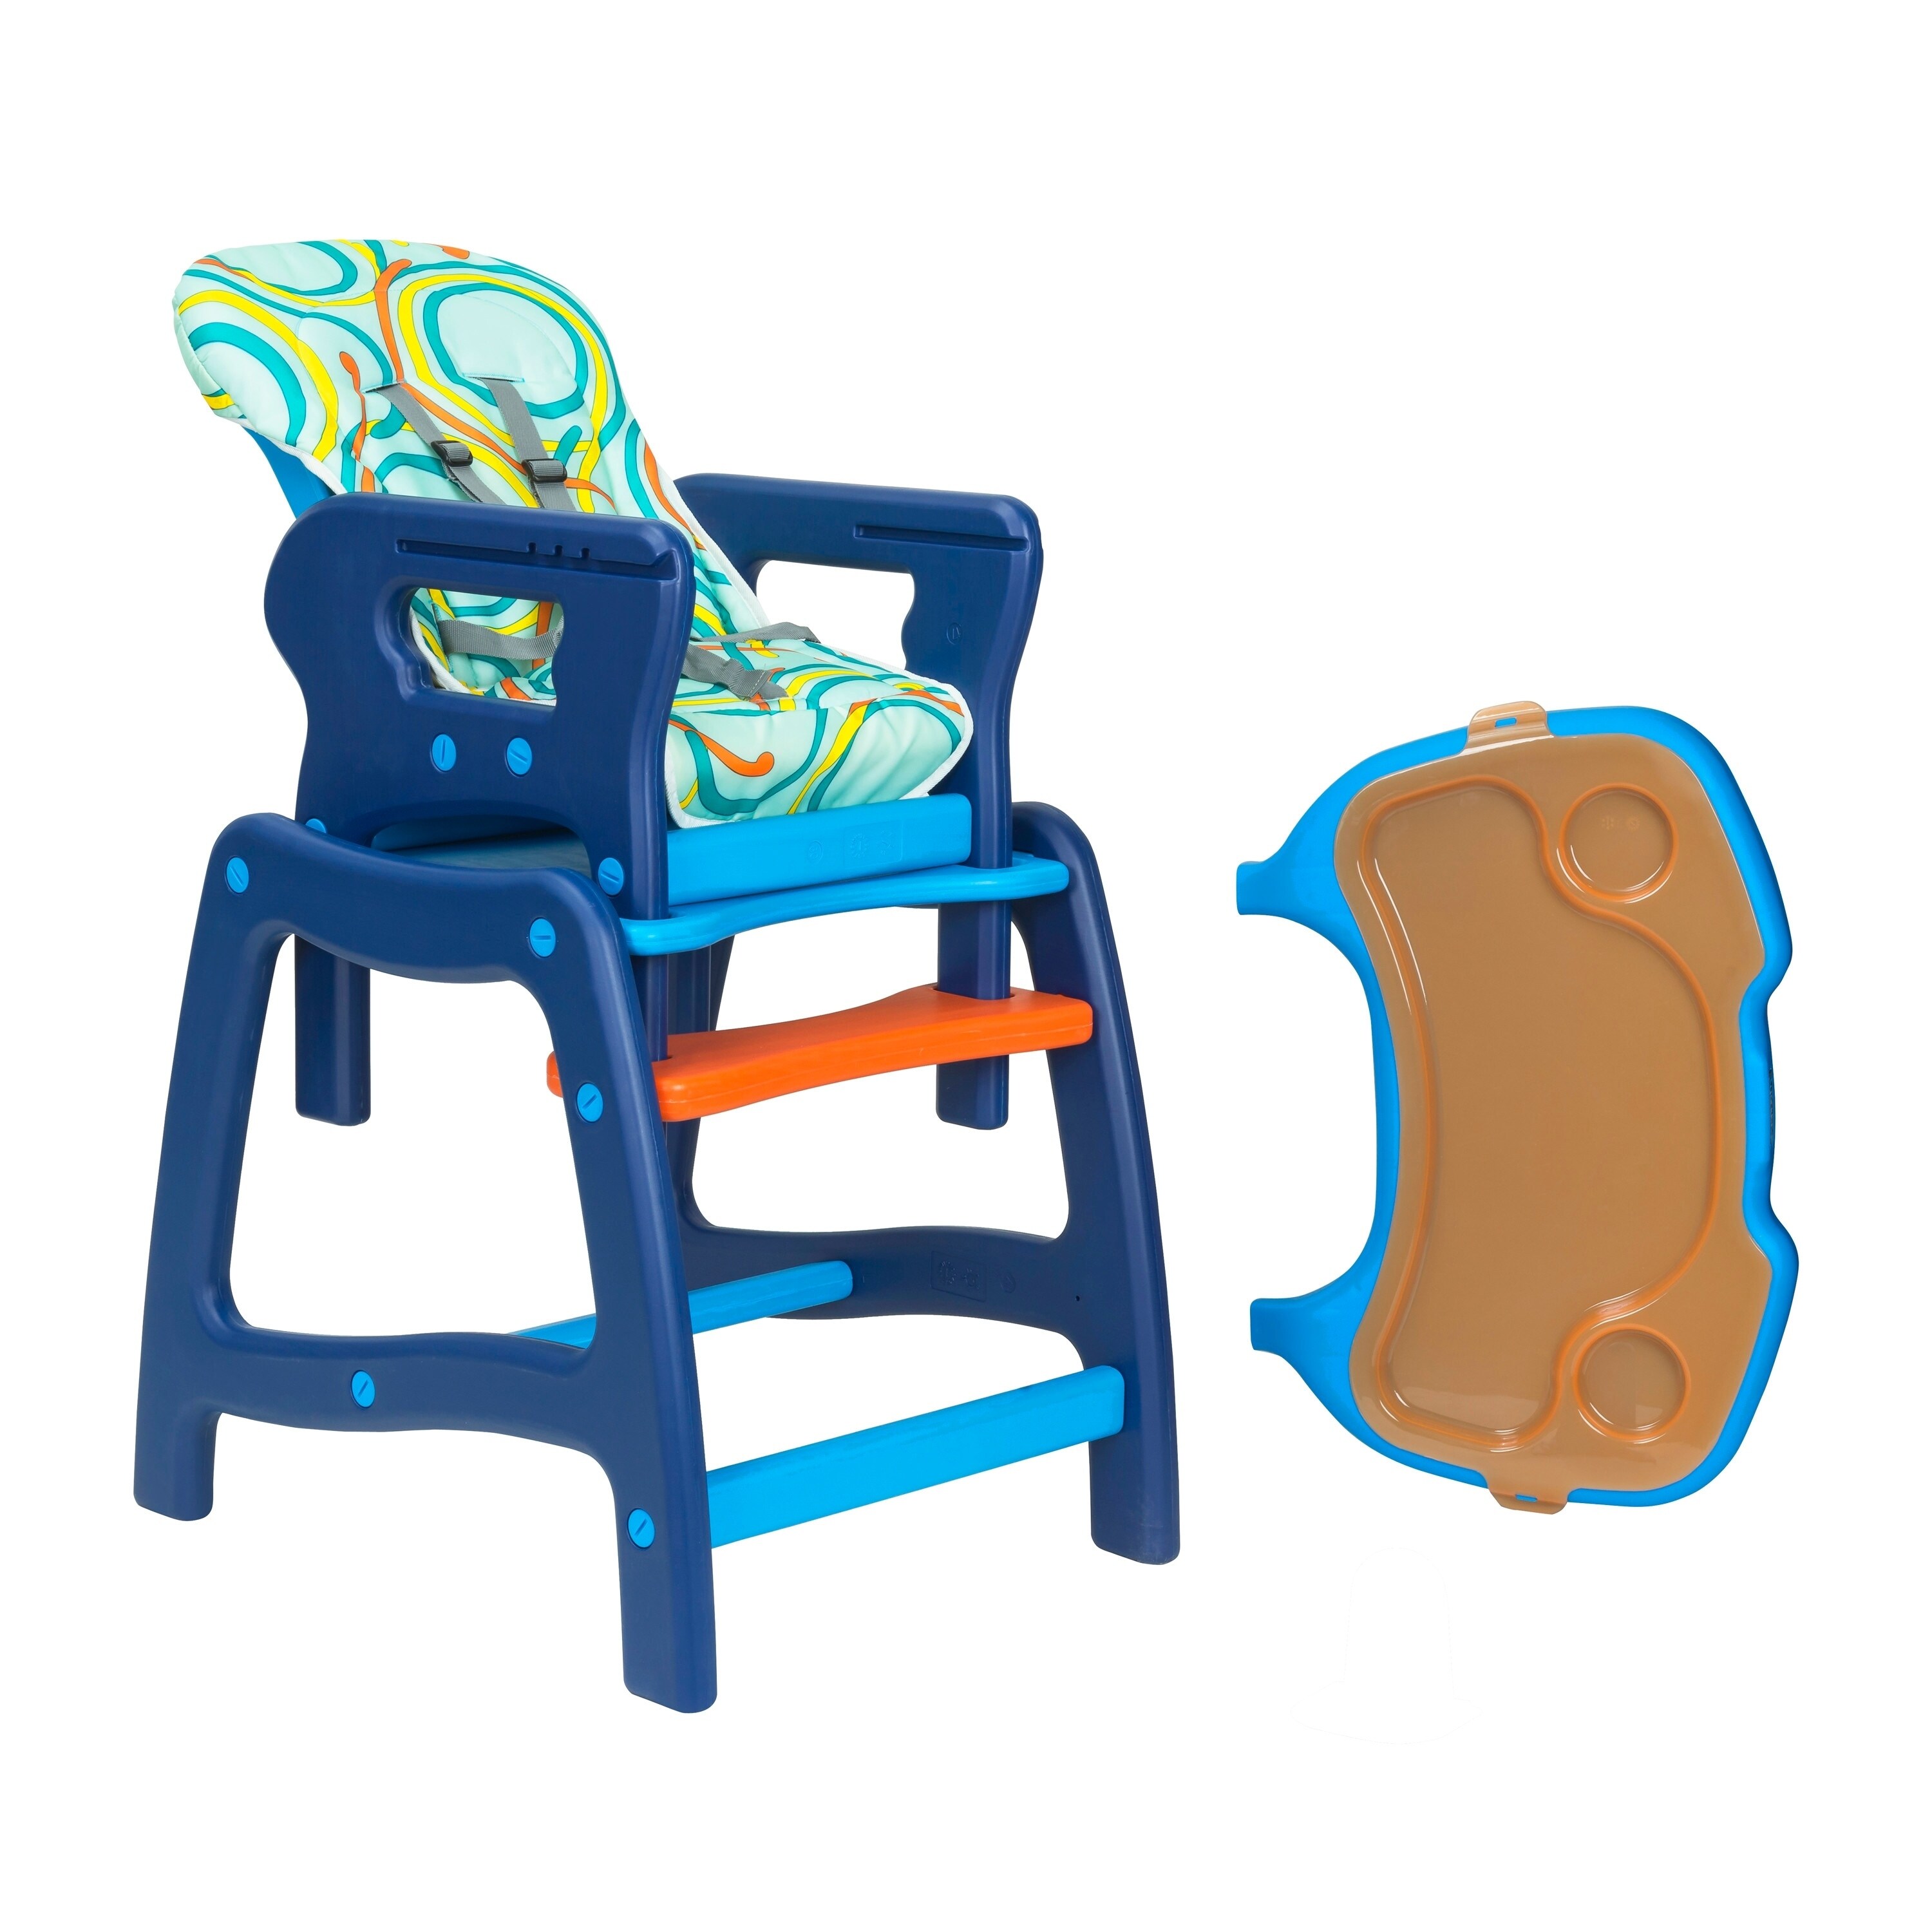 Badger Basket Envee Baby High Chair with Playtable Conversion.